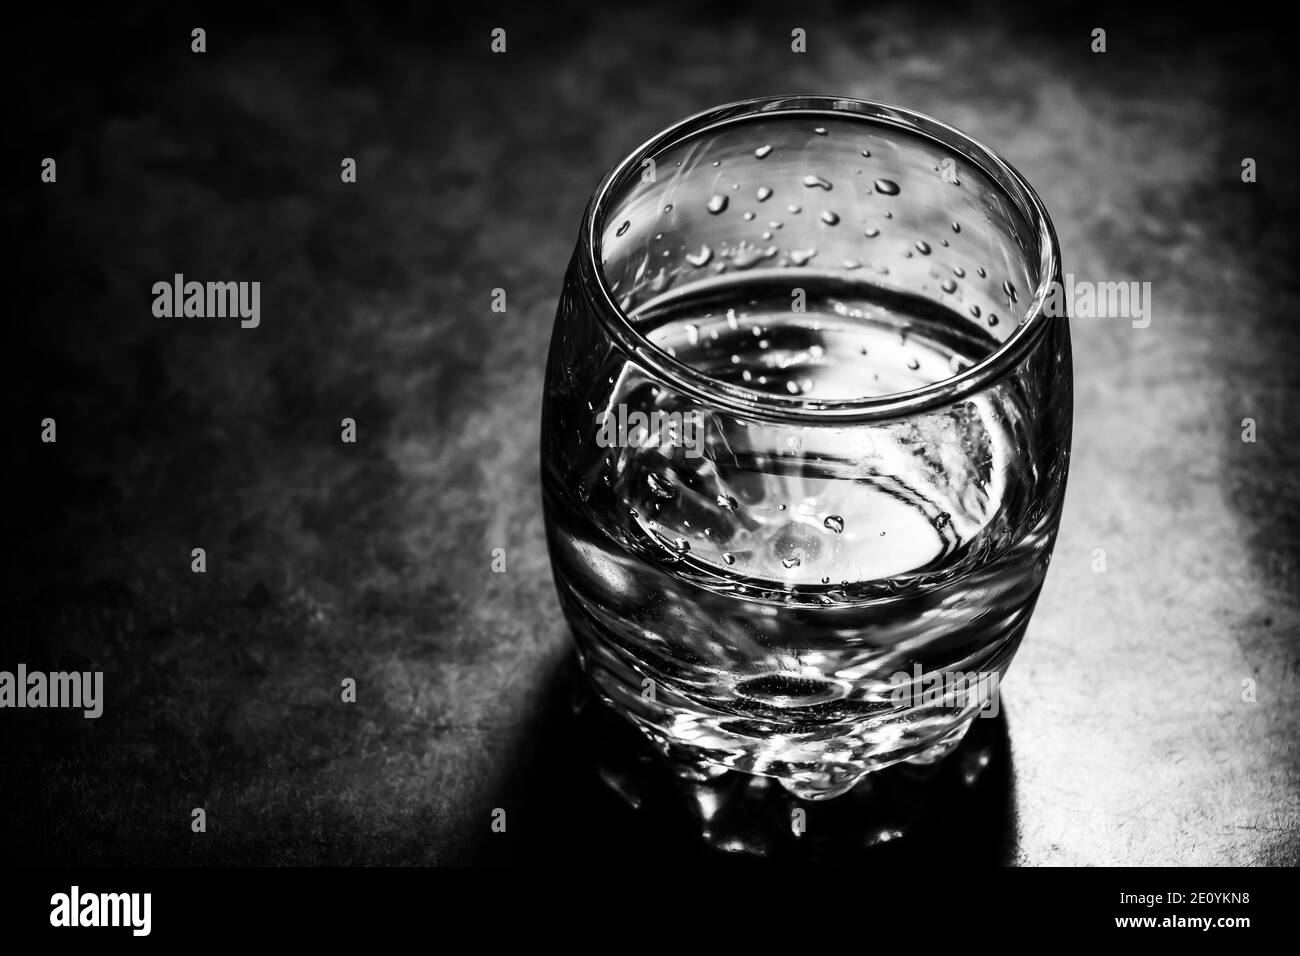 Glass of vodka is on the surface of the black table. Black and white photo. Stock Photo